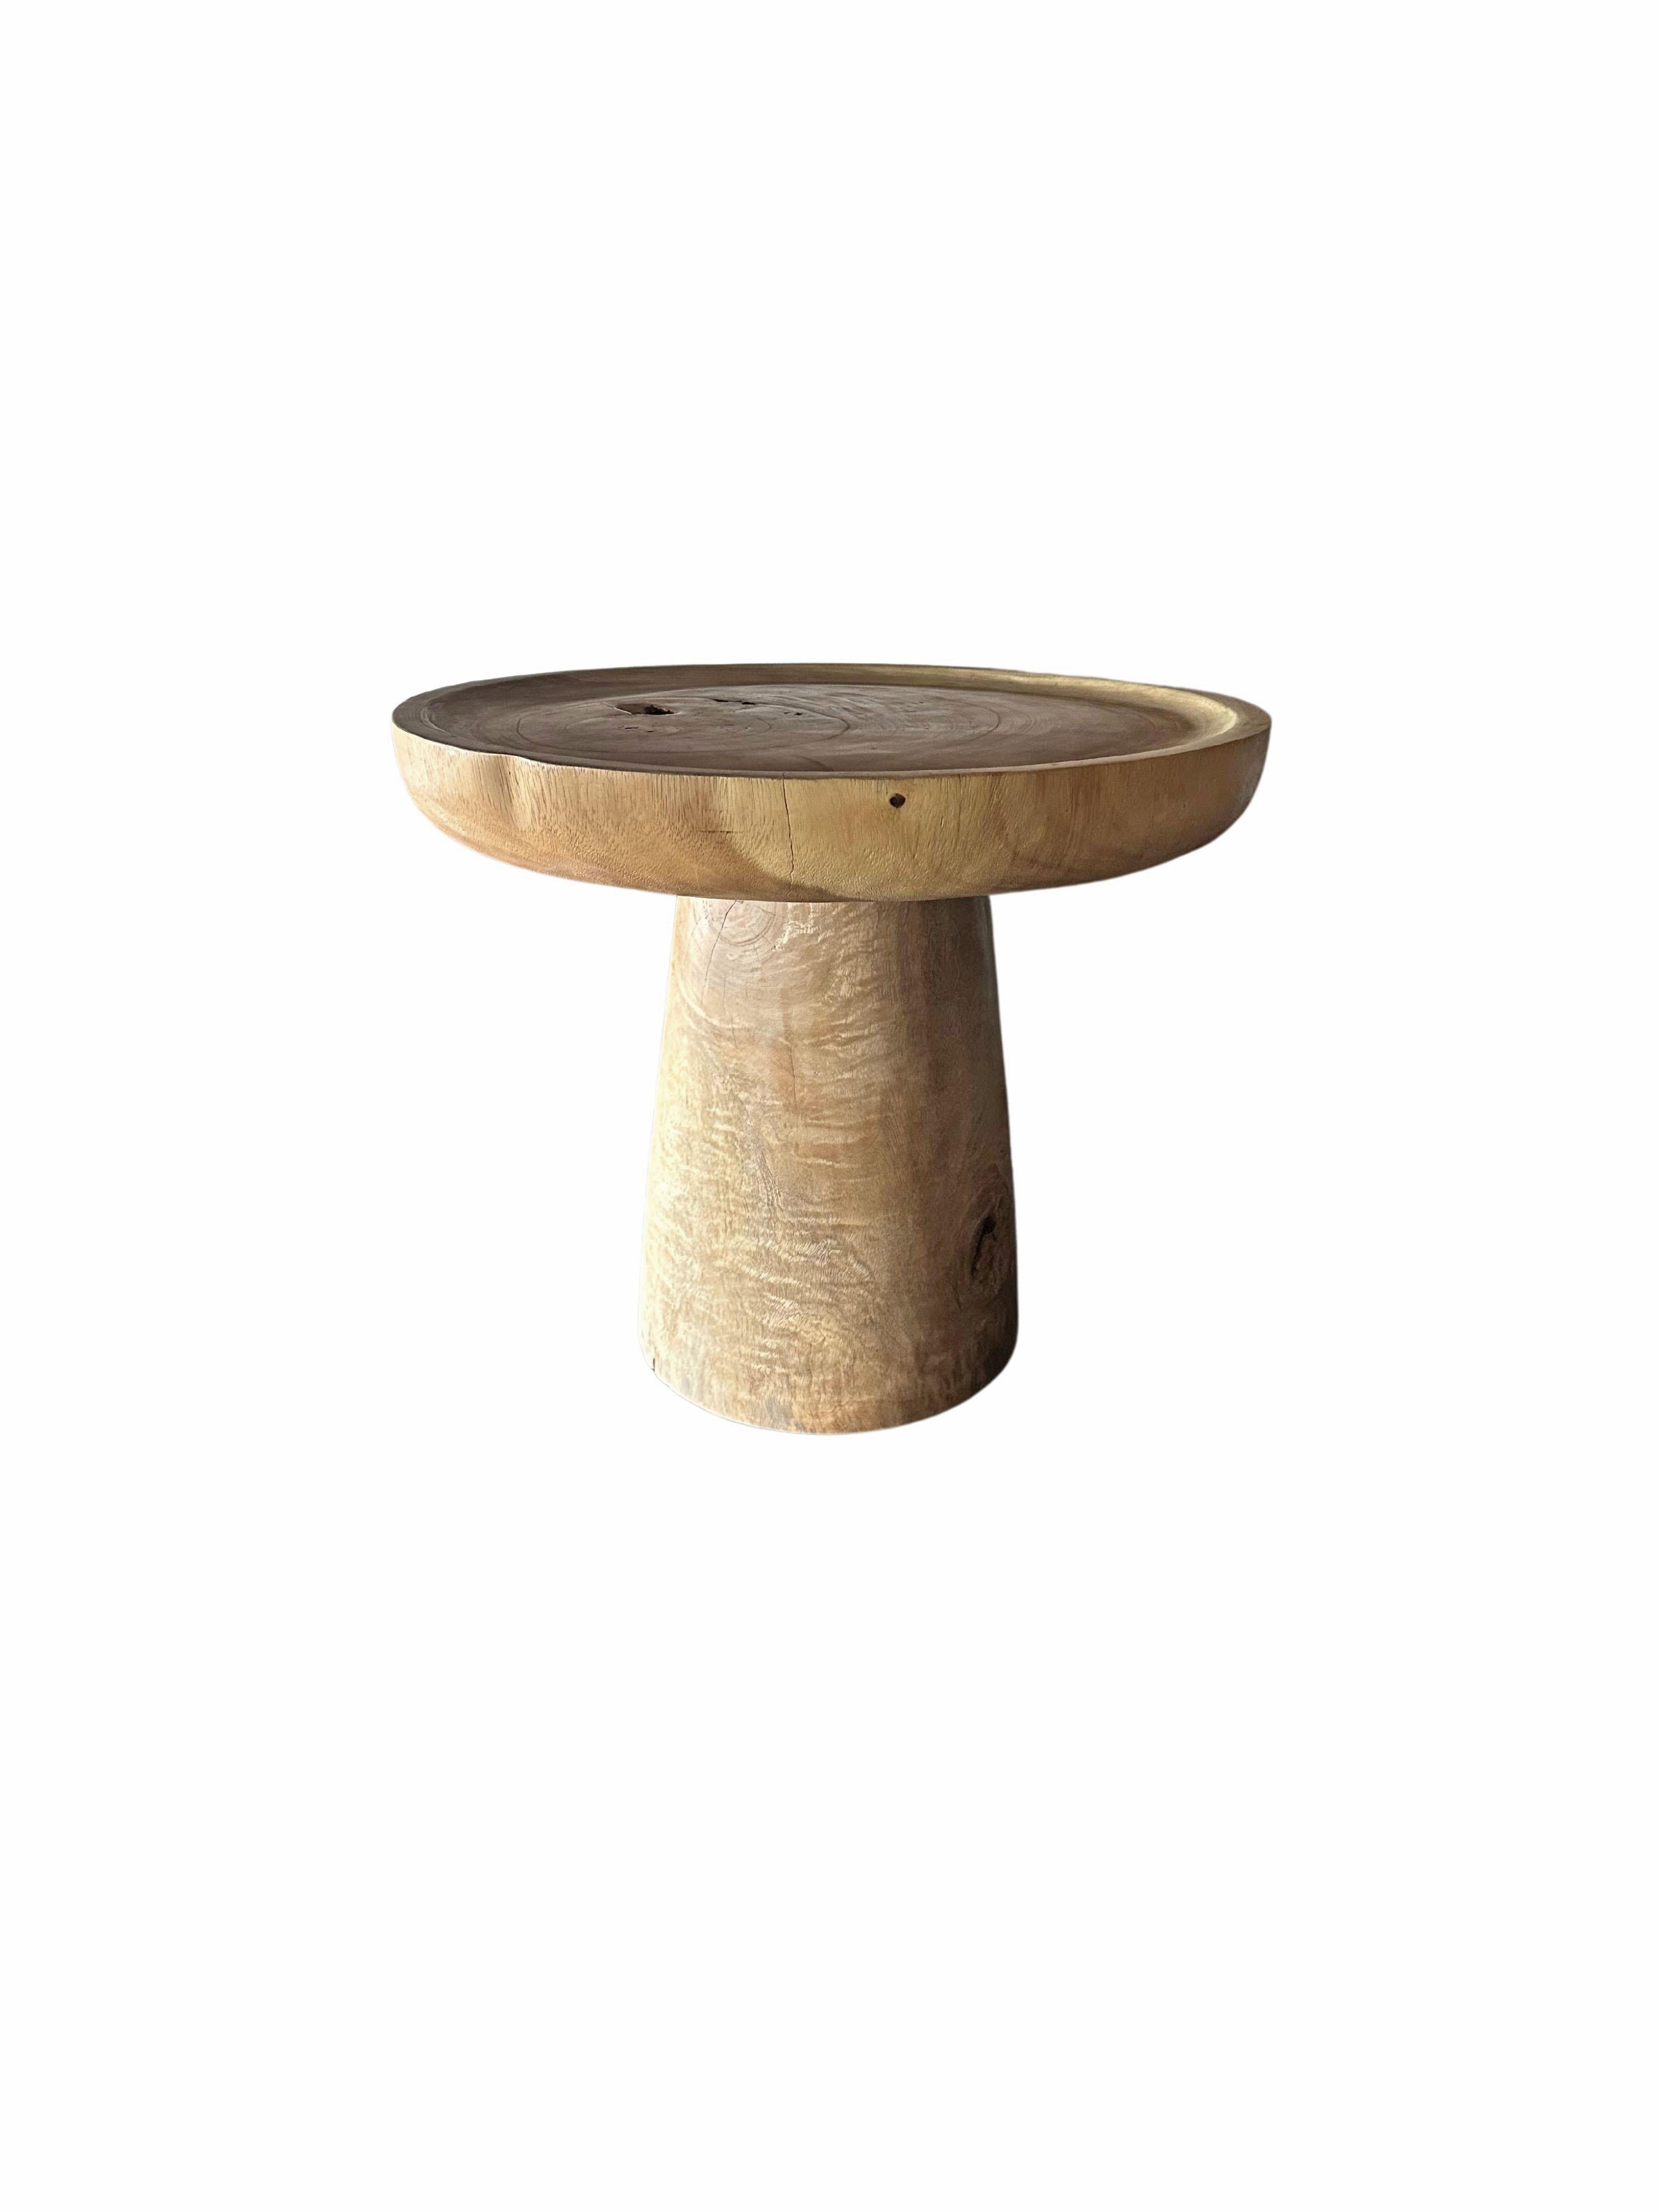 Organic Modern Sculptural Round Side Table Mango Wood Natural For Sale